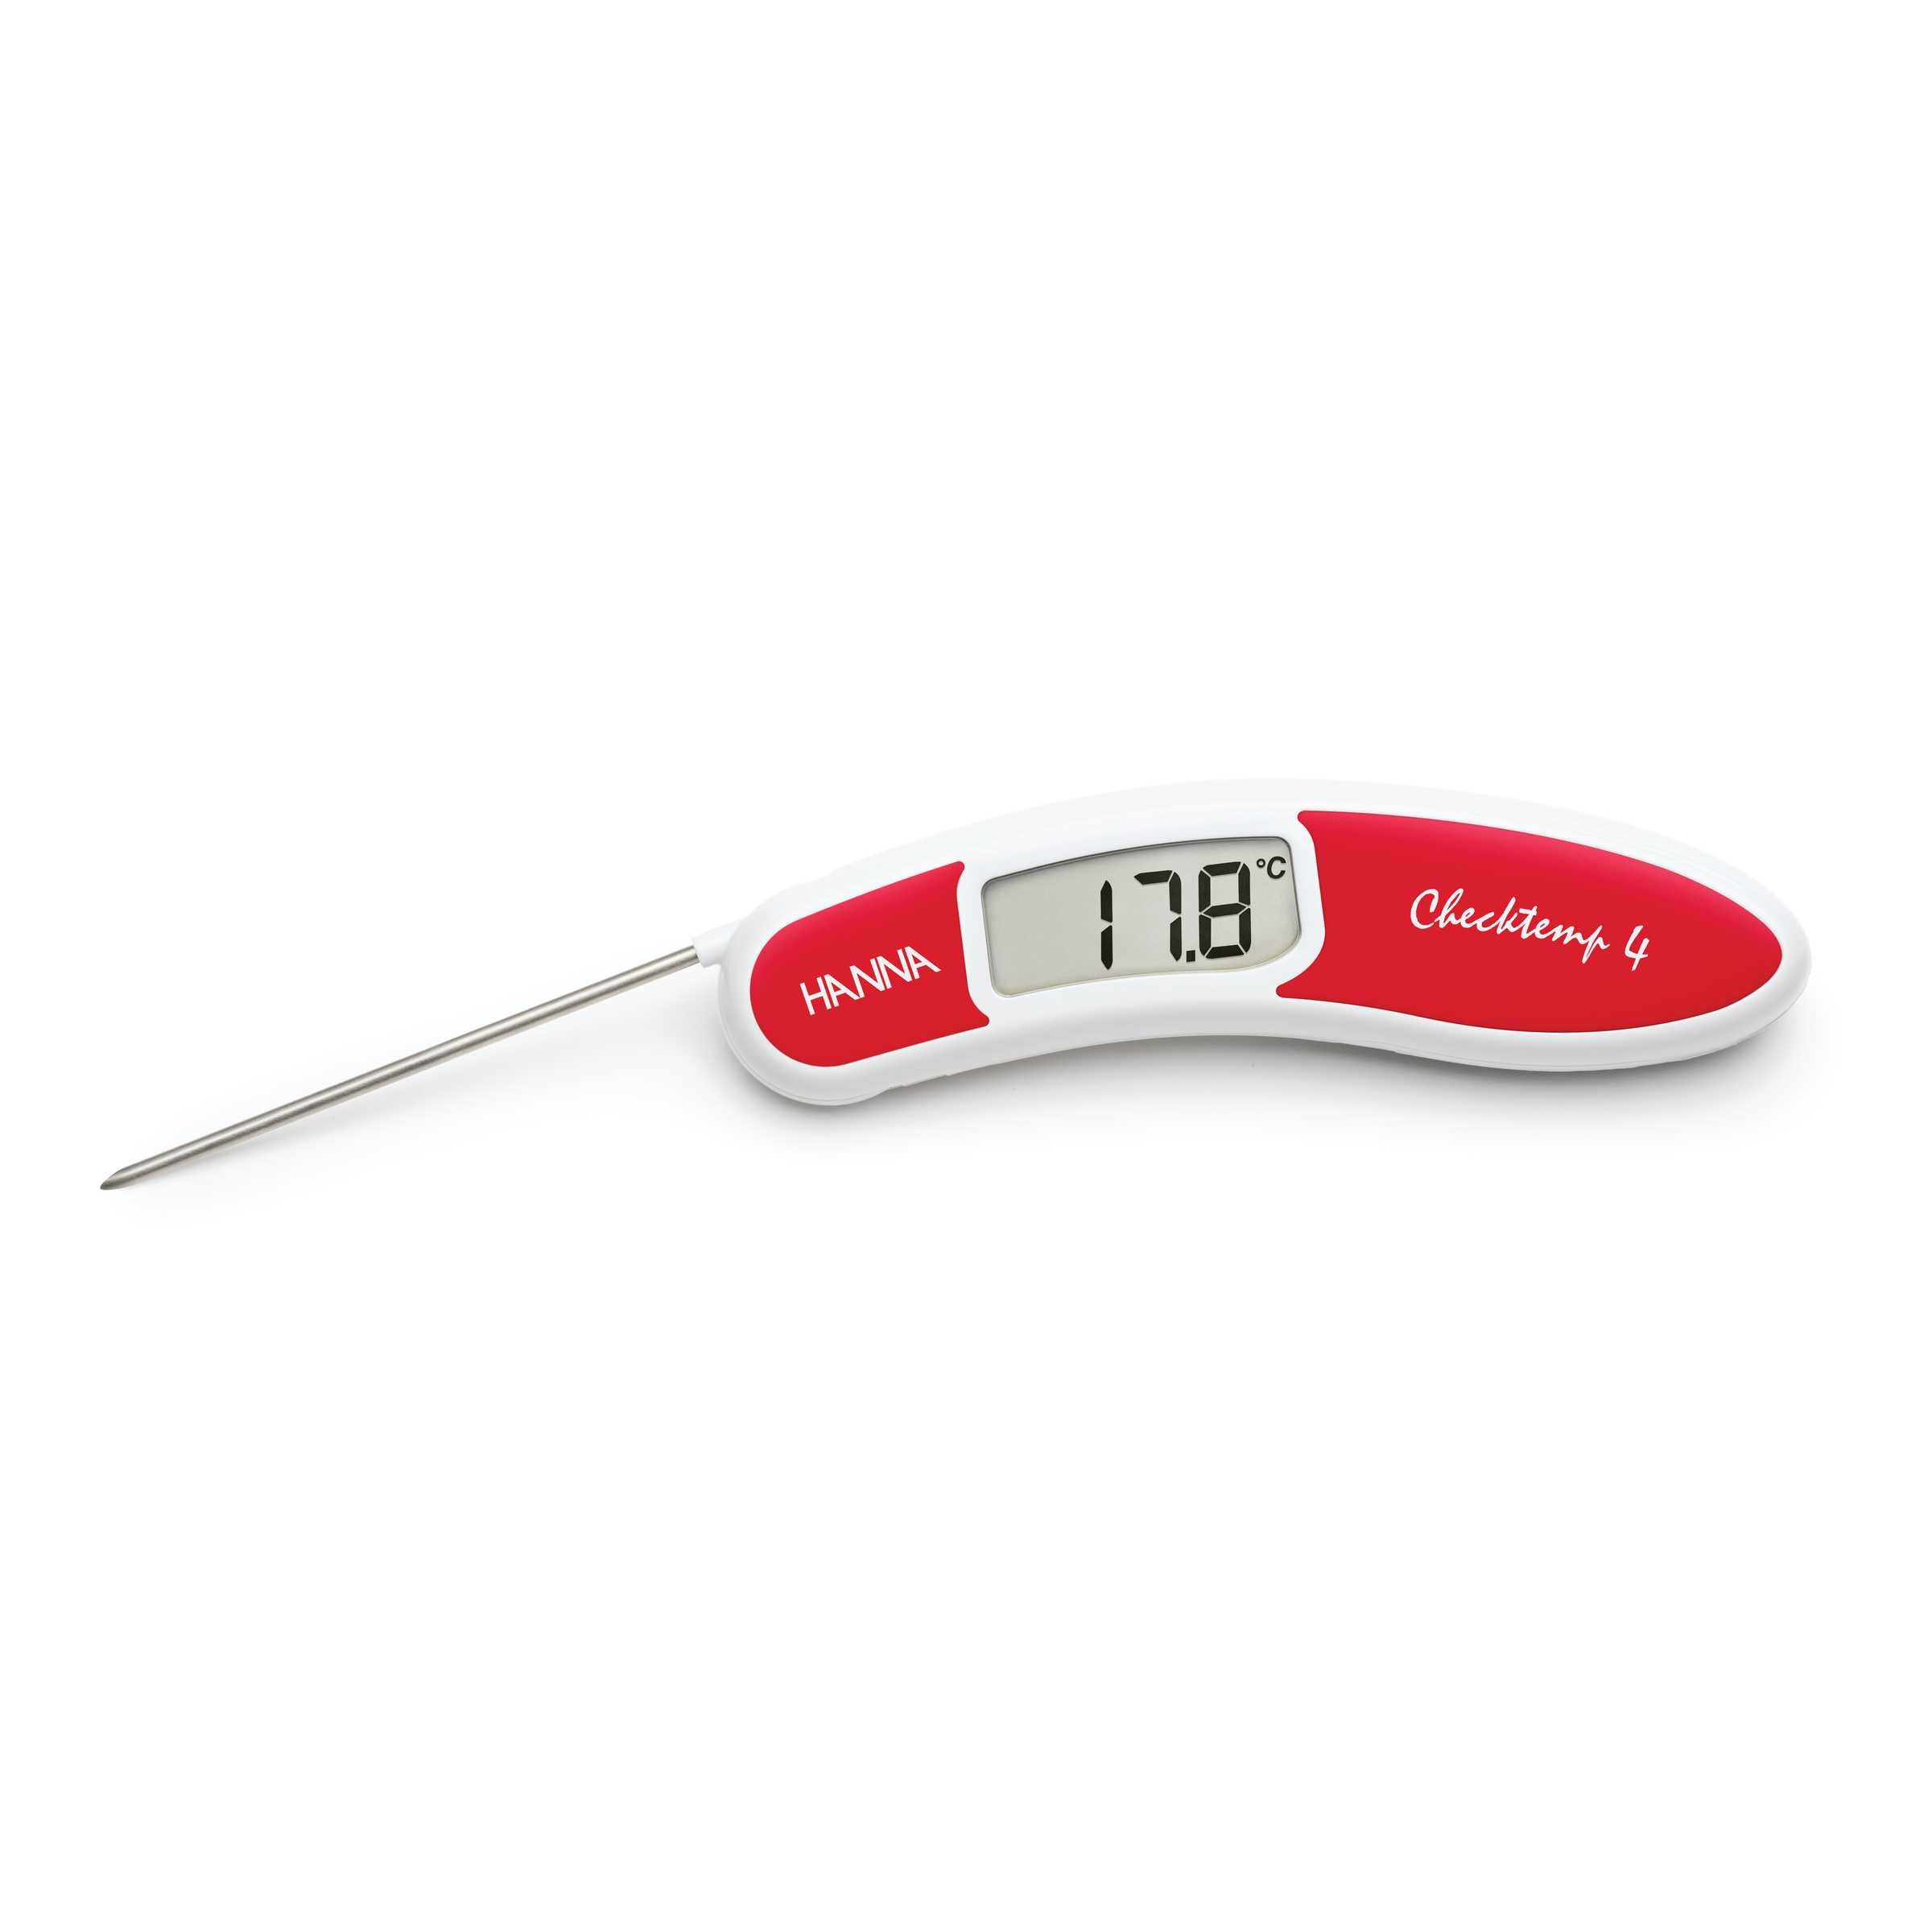 Hanna HI-151-1C Checktemp4 red folding thermometer - Sinclair Campbell